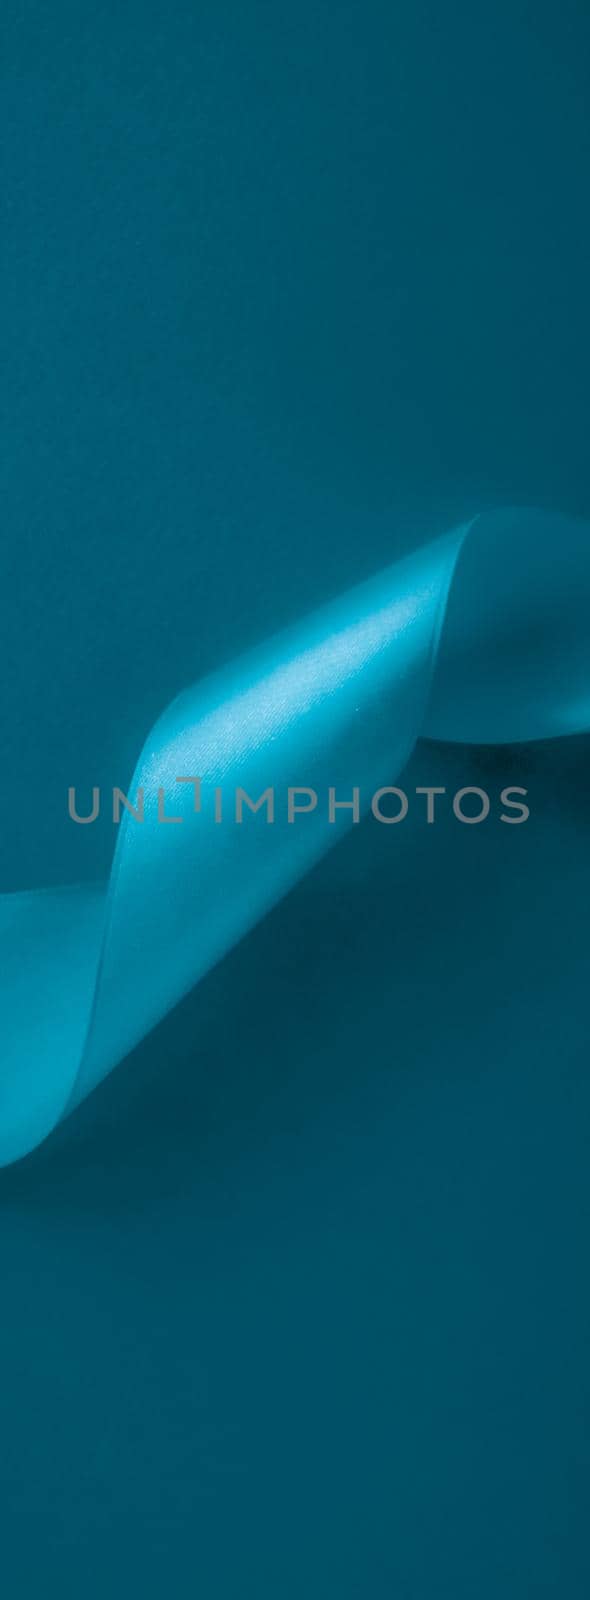 Branding, holidays and luxe brands concept - Abstract silk ribbon on aqua blue background, exclusive luxury brand design for holiday sale product promotion and glamour art invitation card backdrop